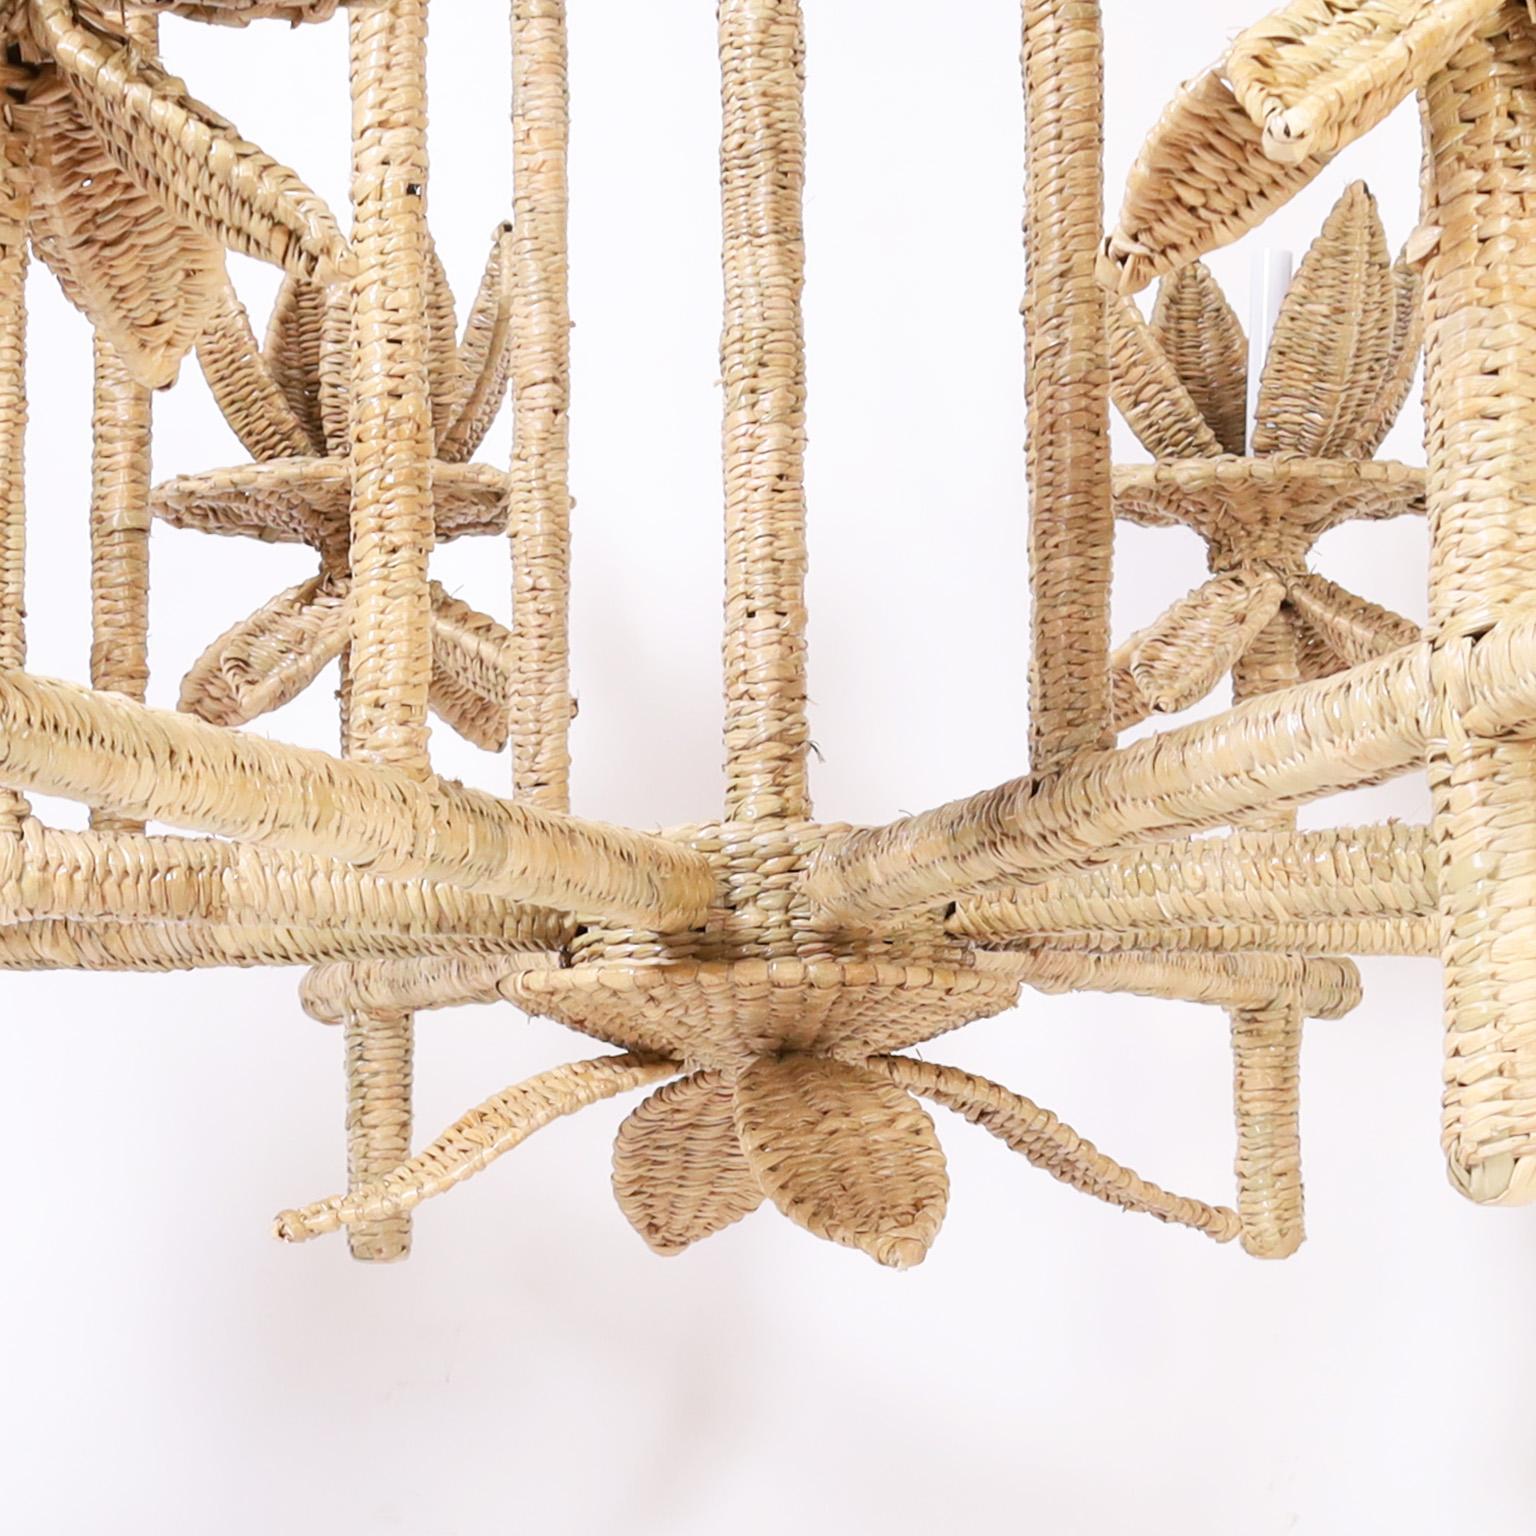 Mid-Century Modern Seychelles Woven Reed Pagoda Form Chandelier from the FS Flores Collection For Sale